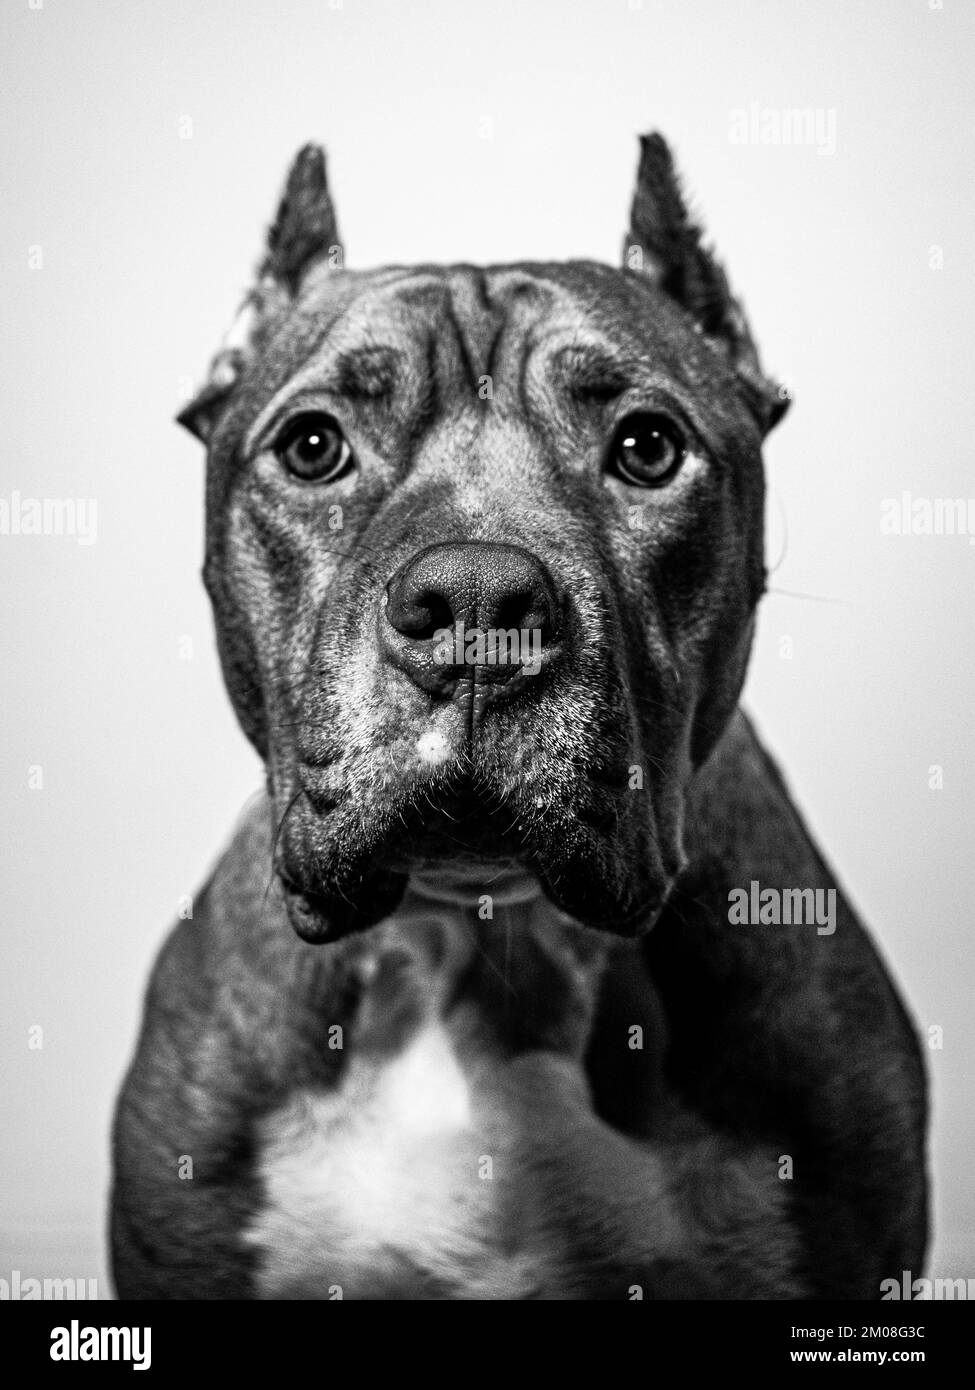 Red nose dog Black and White Stock Photos & Images - Alamy